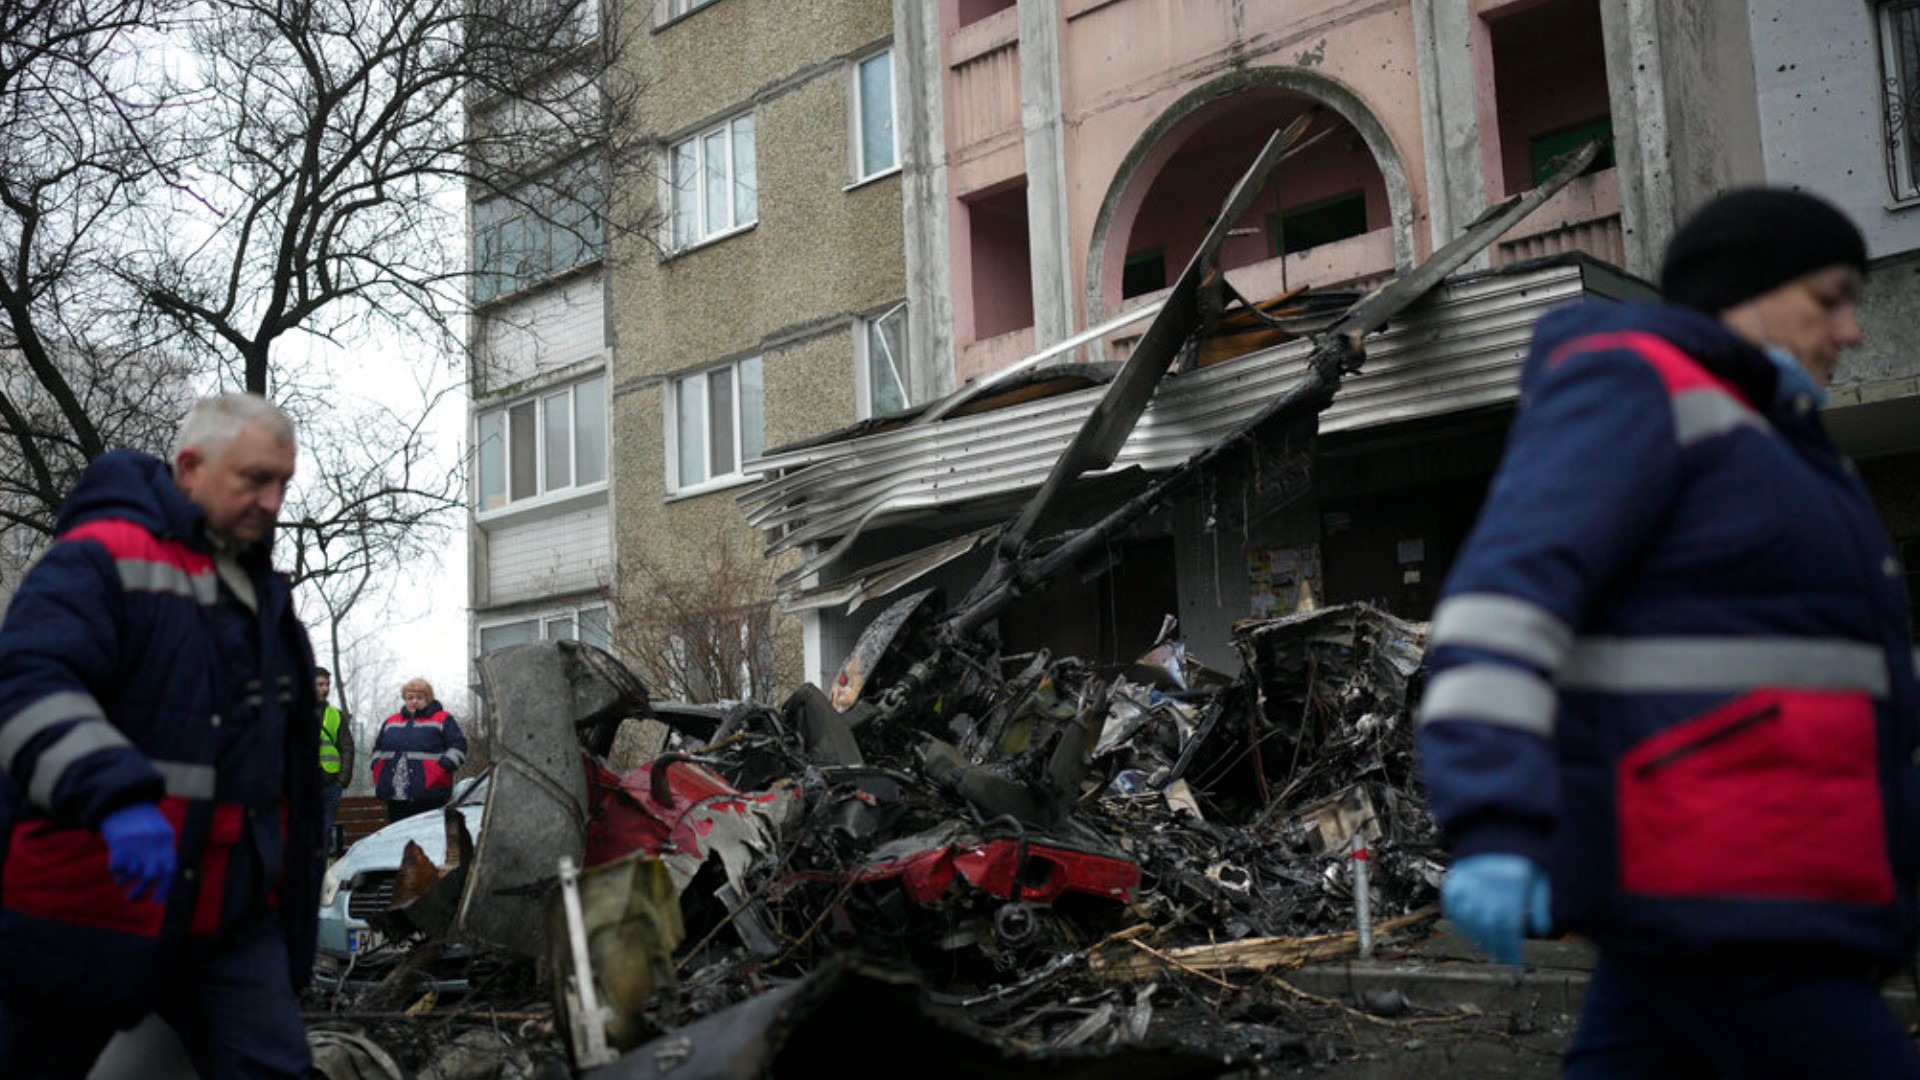 The cause of the crash was unclear Wednesday morning, but it comes days after a deadly Russian attack on an apartment building that killed 45.